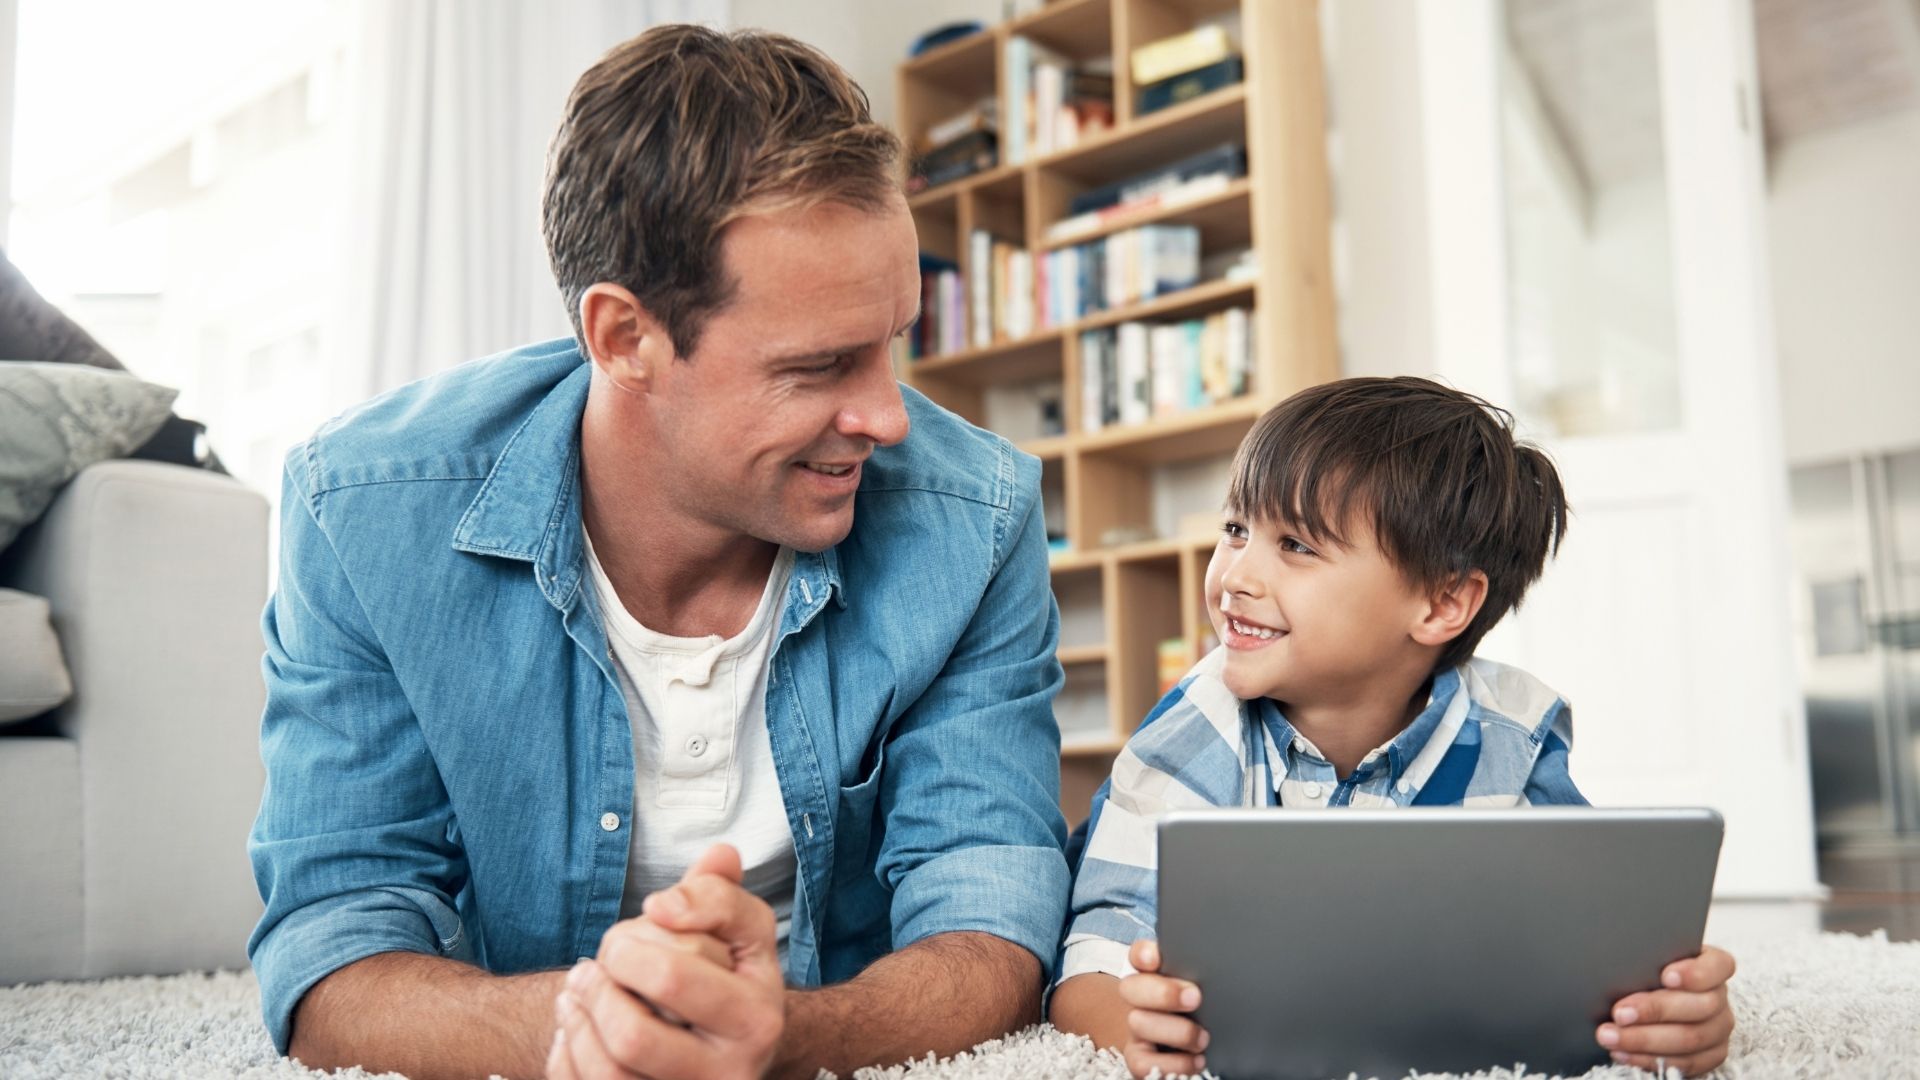 Young boy holds onto smart tablet while looking at older man who is sitting next to him